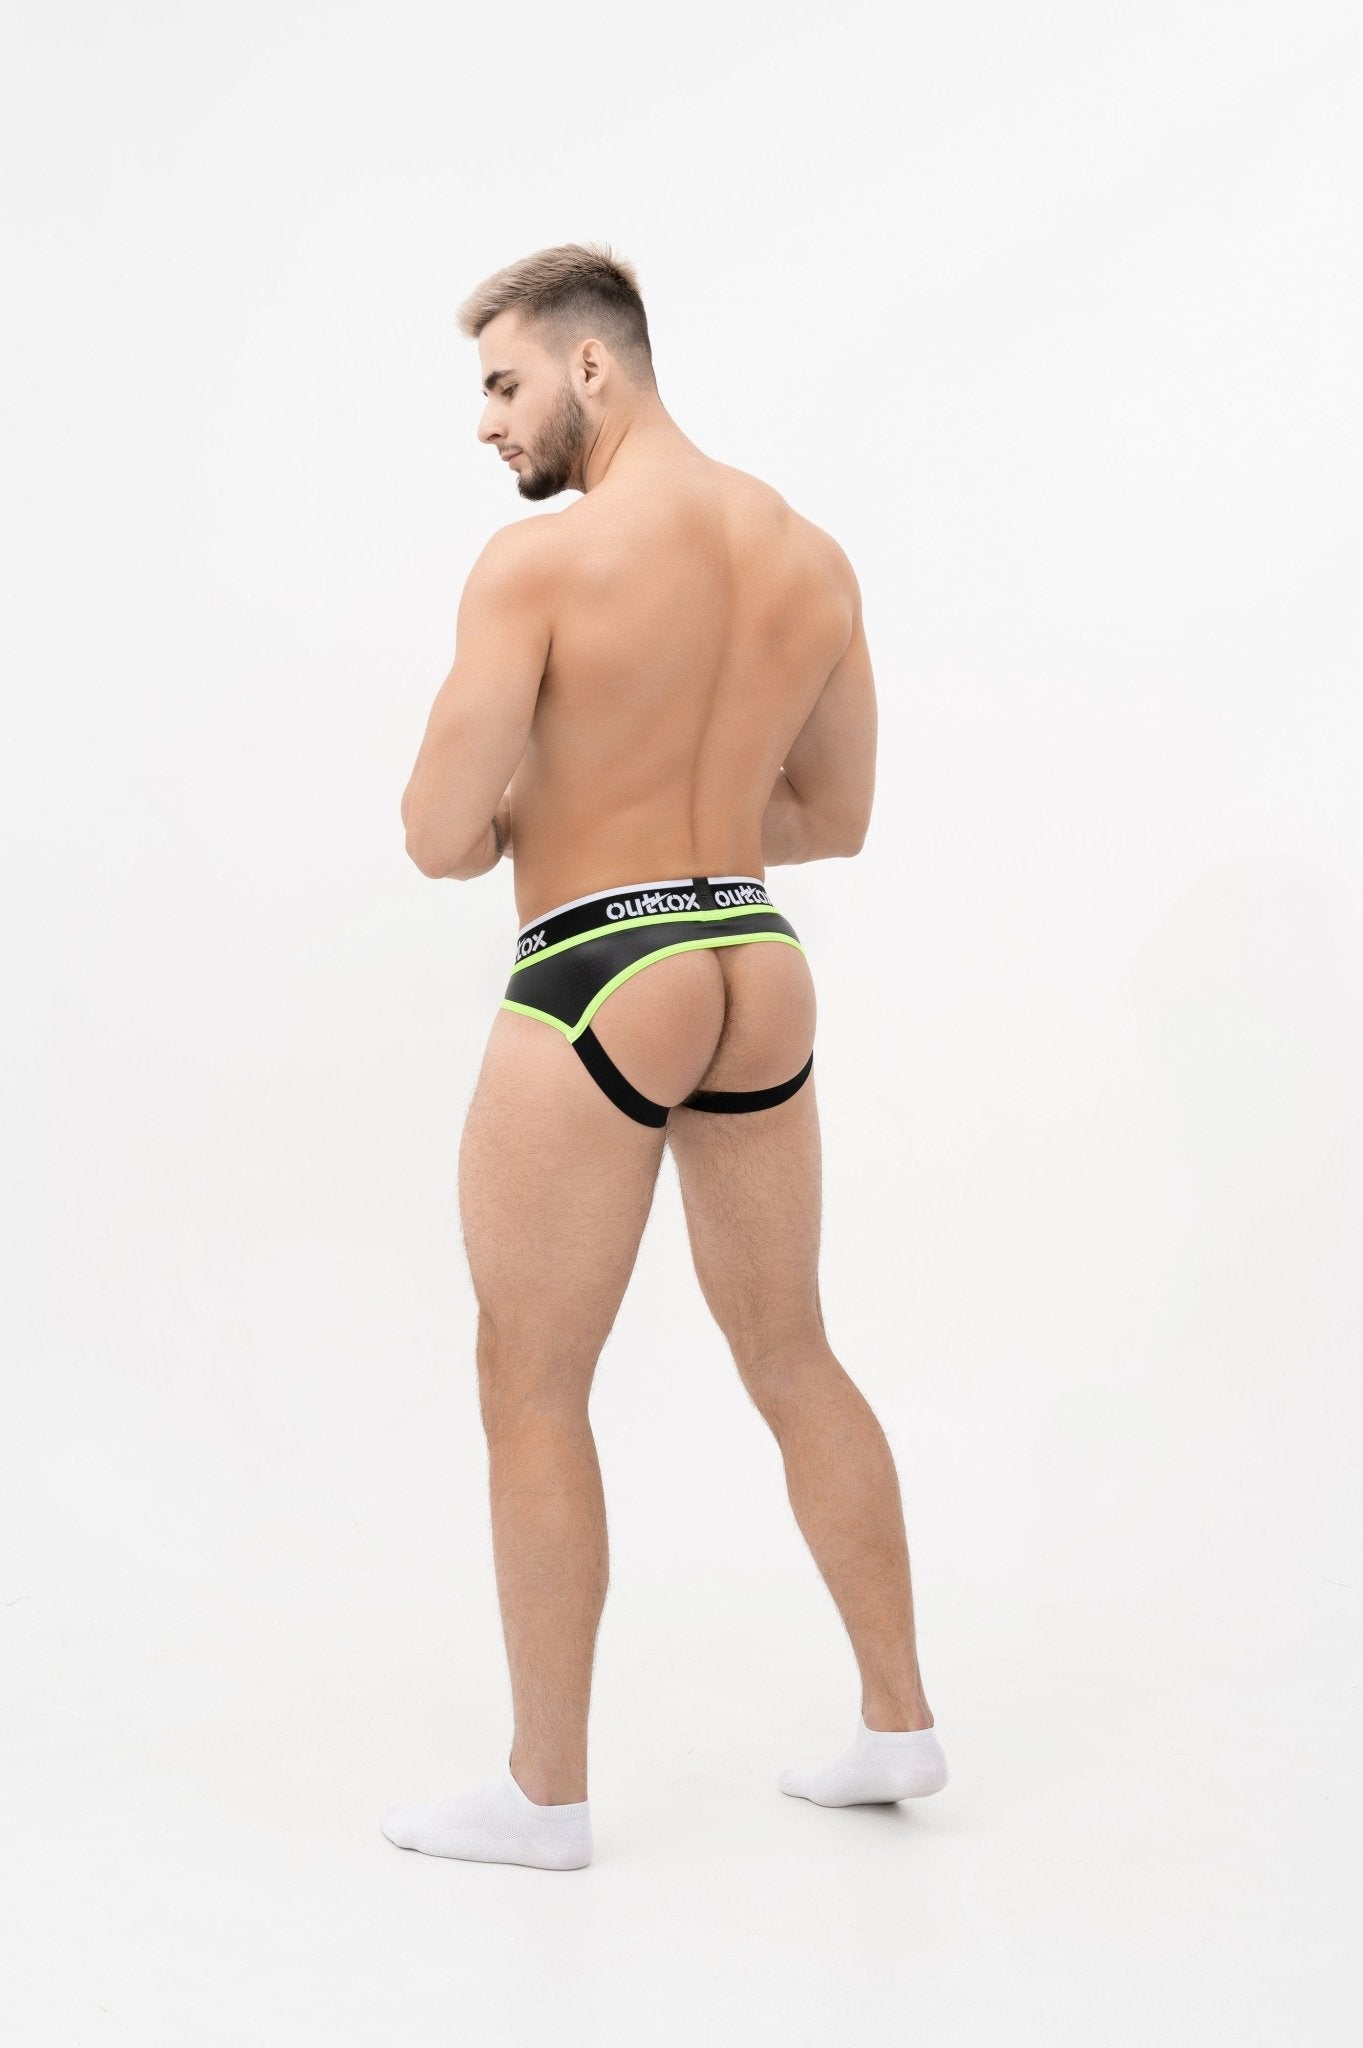 Outtox Open Rear Brief with Snap Codpiece - Jockstraps.com